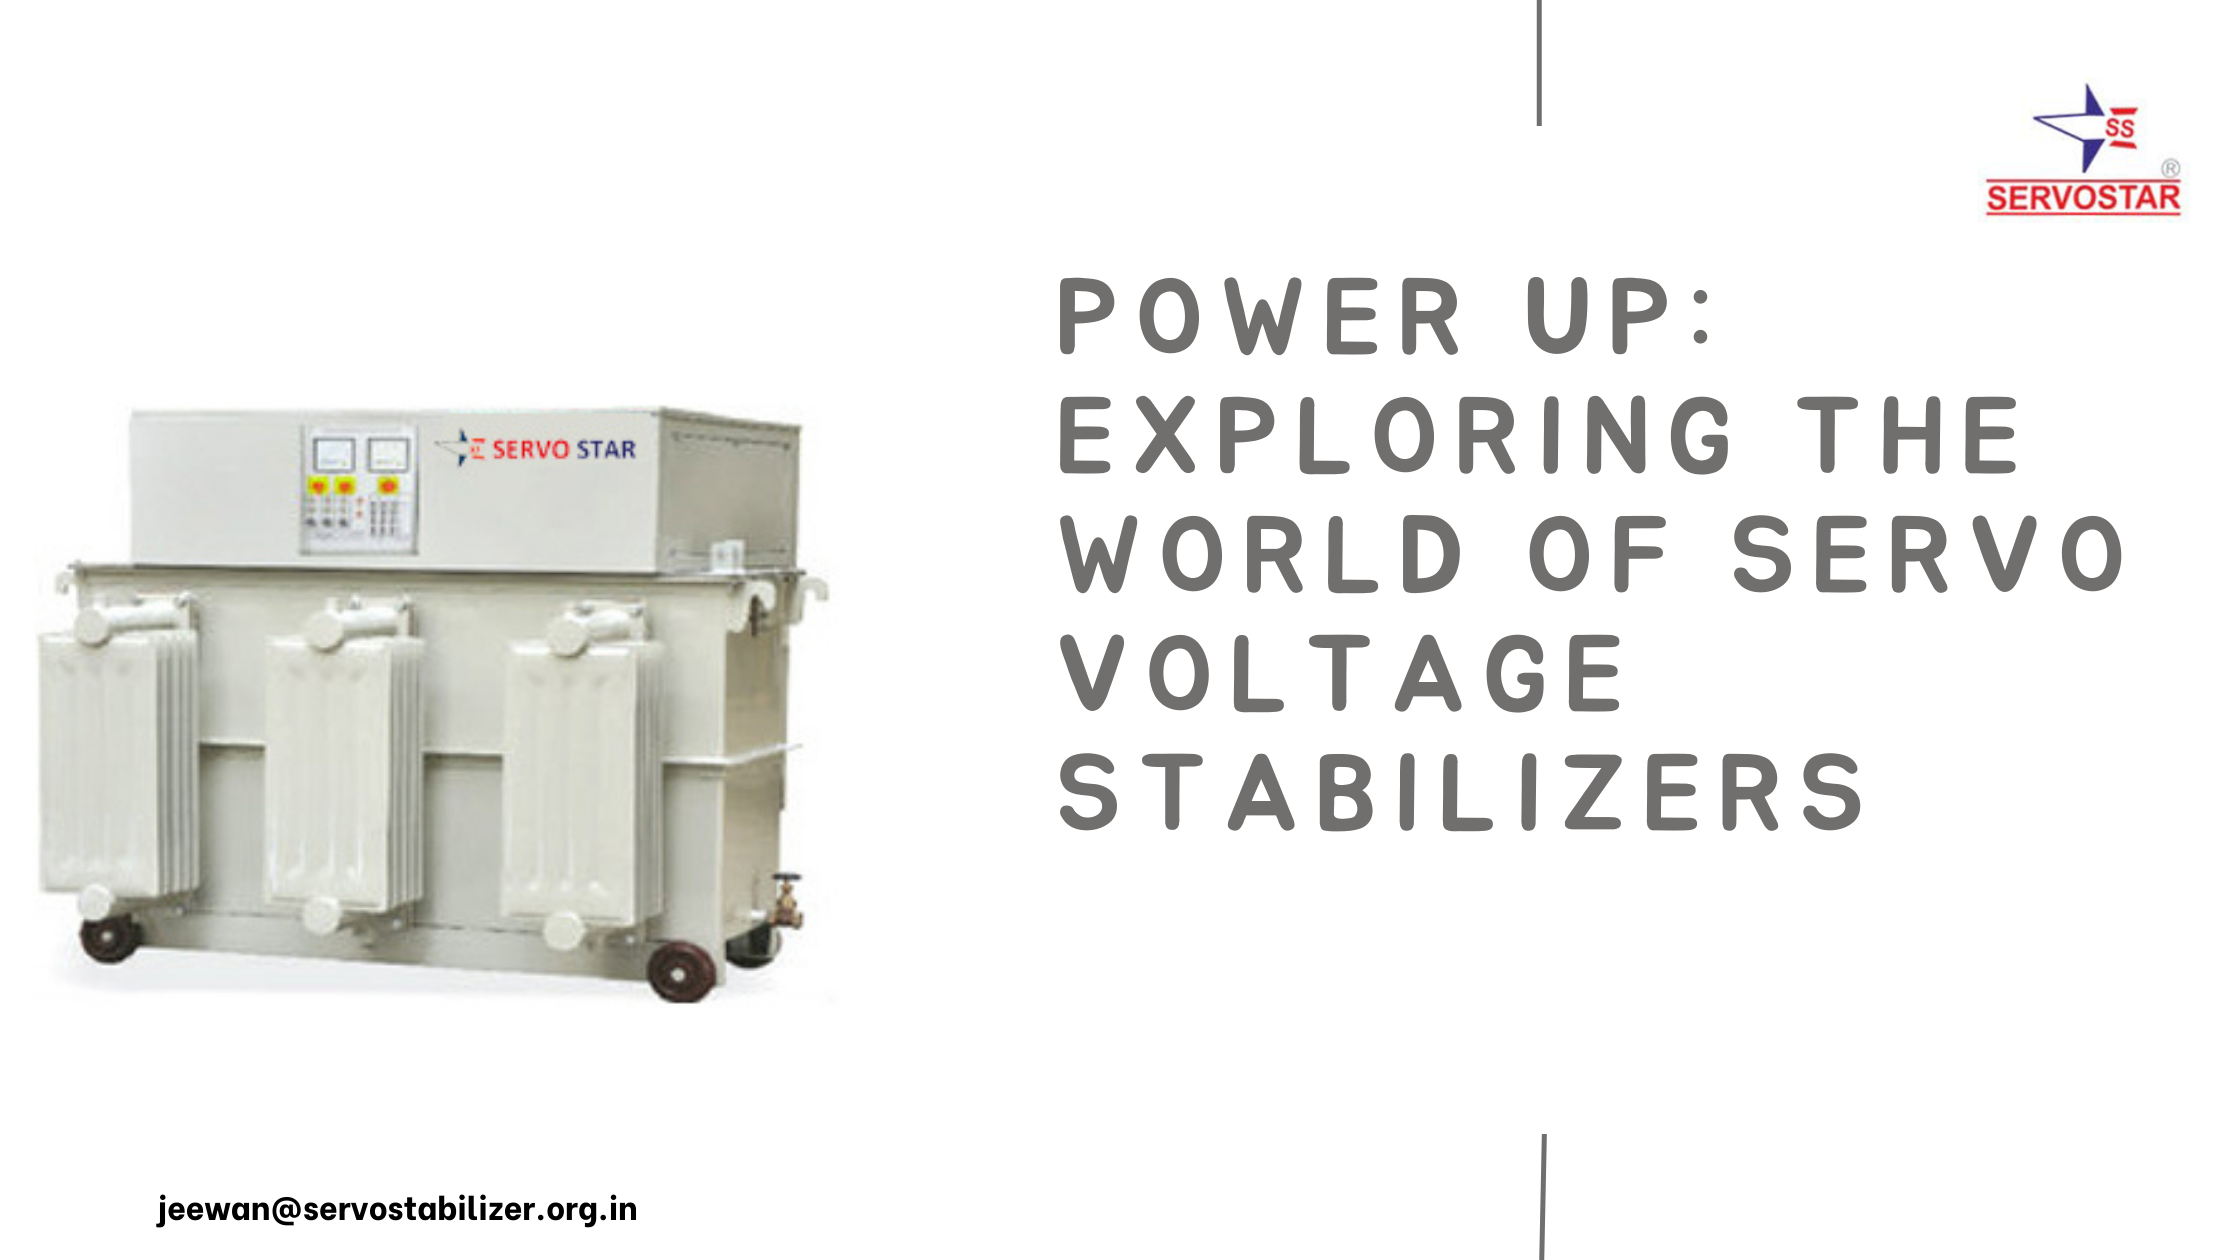 Power Up: Exploring the World of Servo Voltage Stabilizers